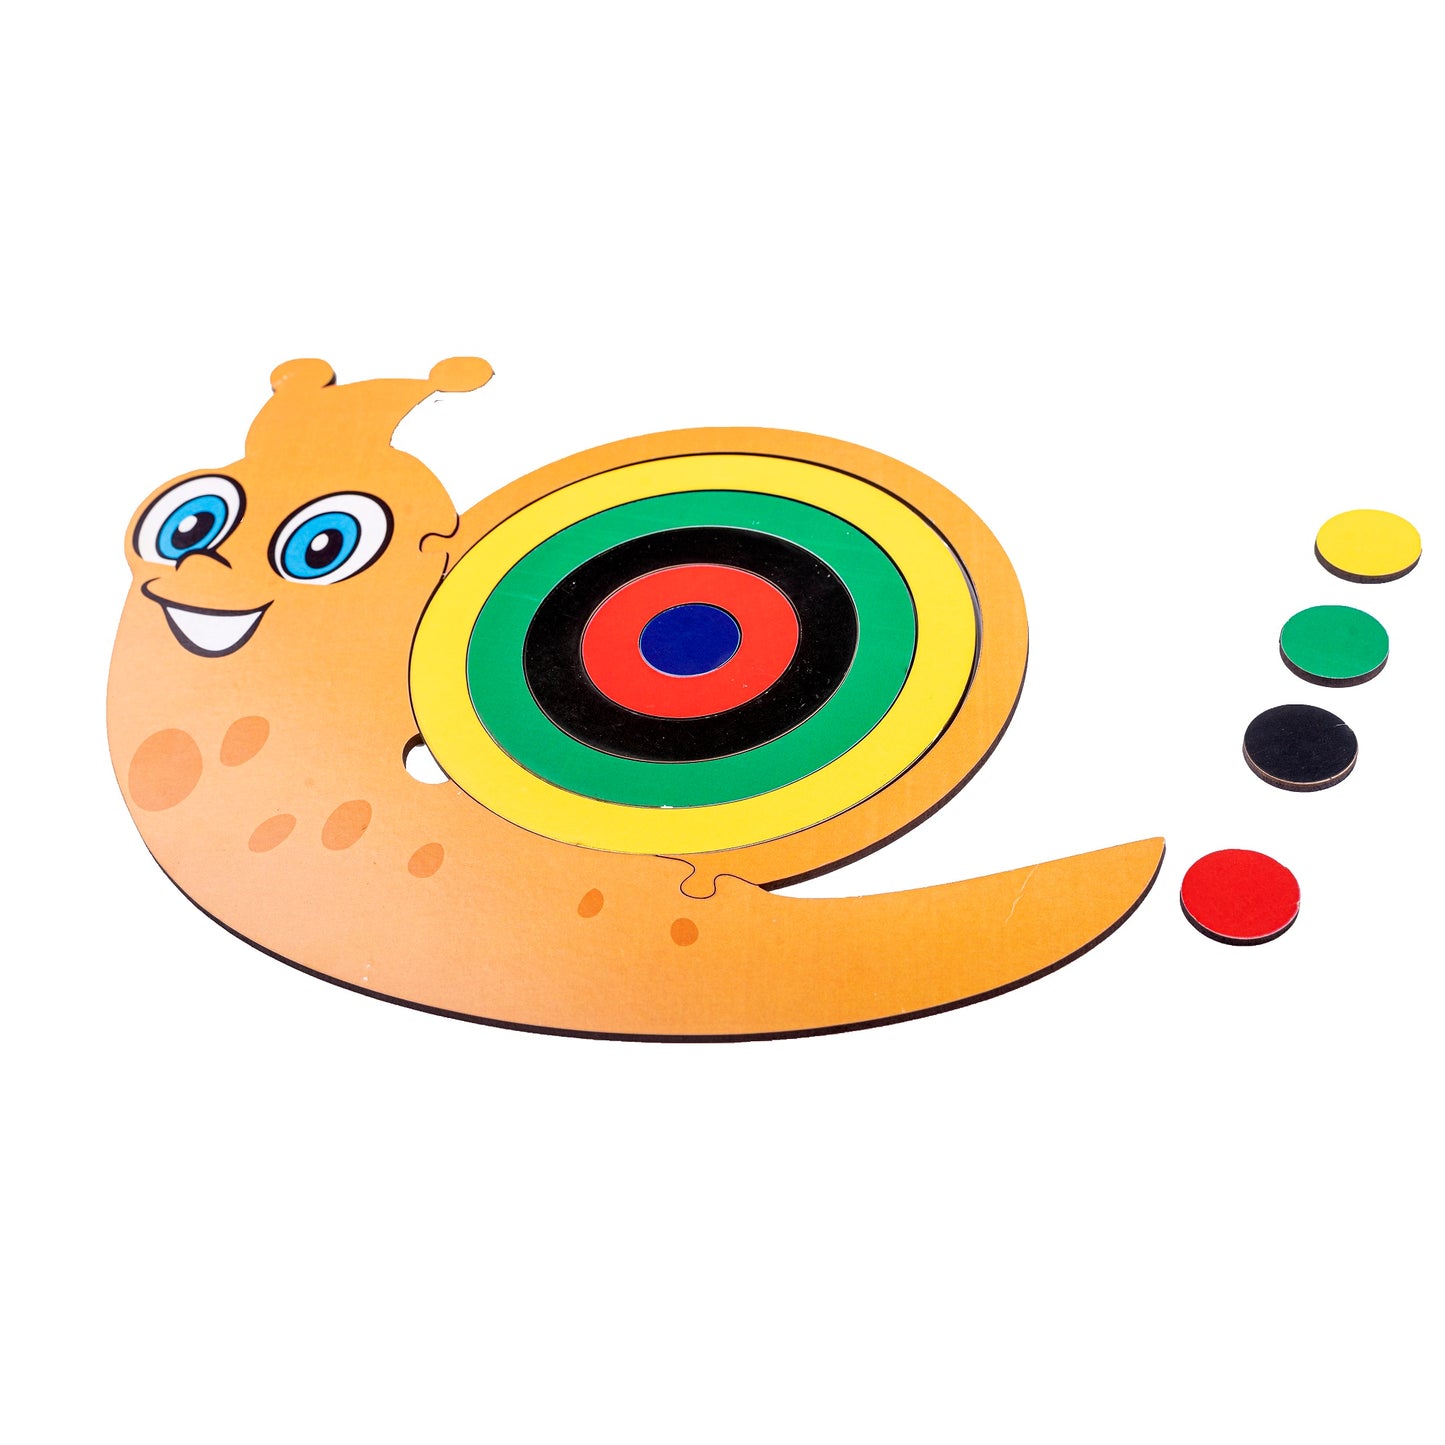 Snail Pattern Matching Activity Board Game